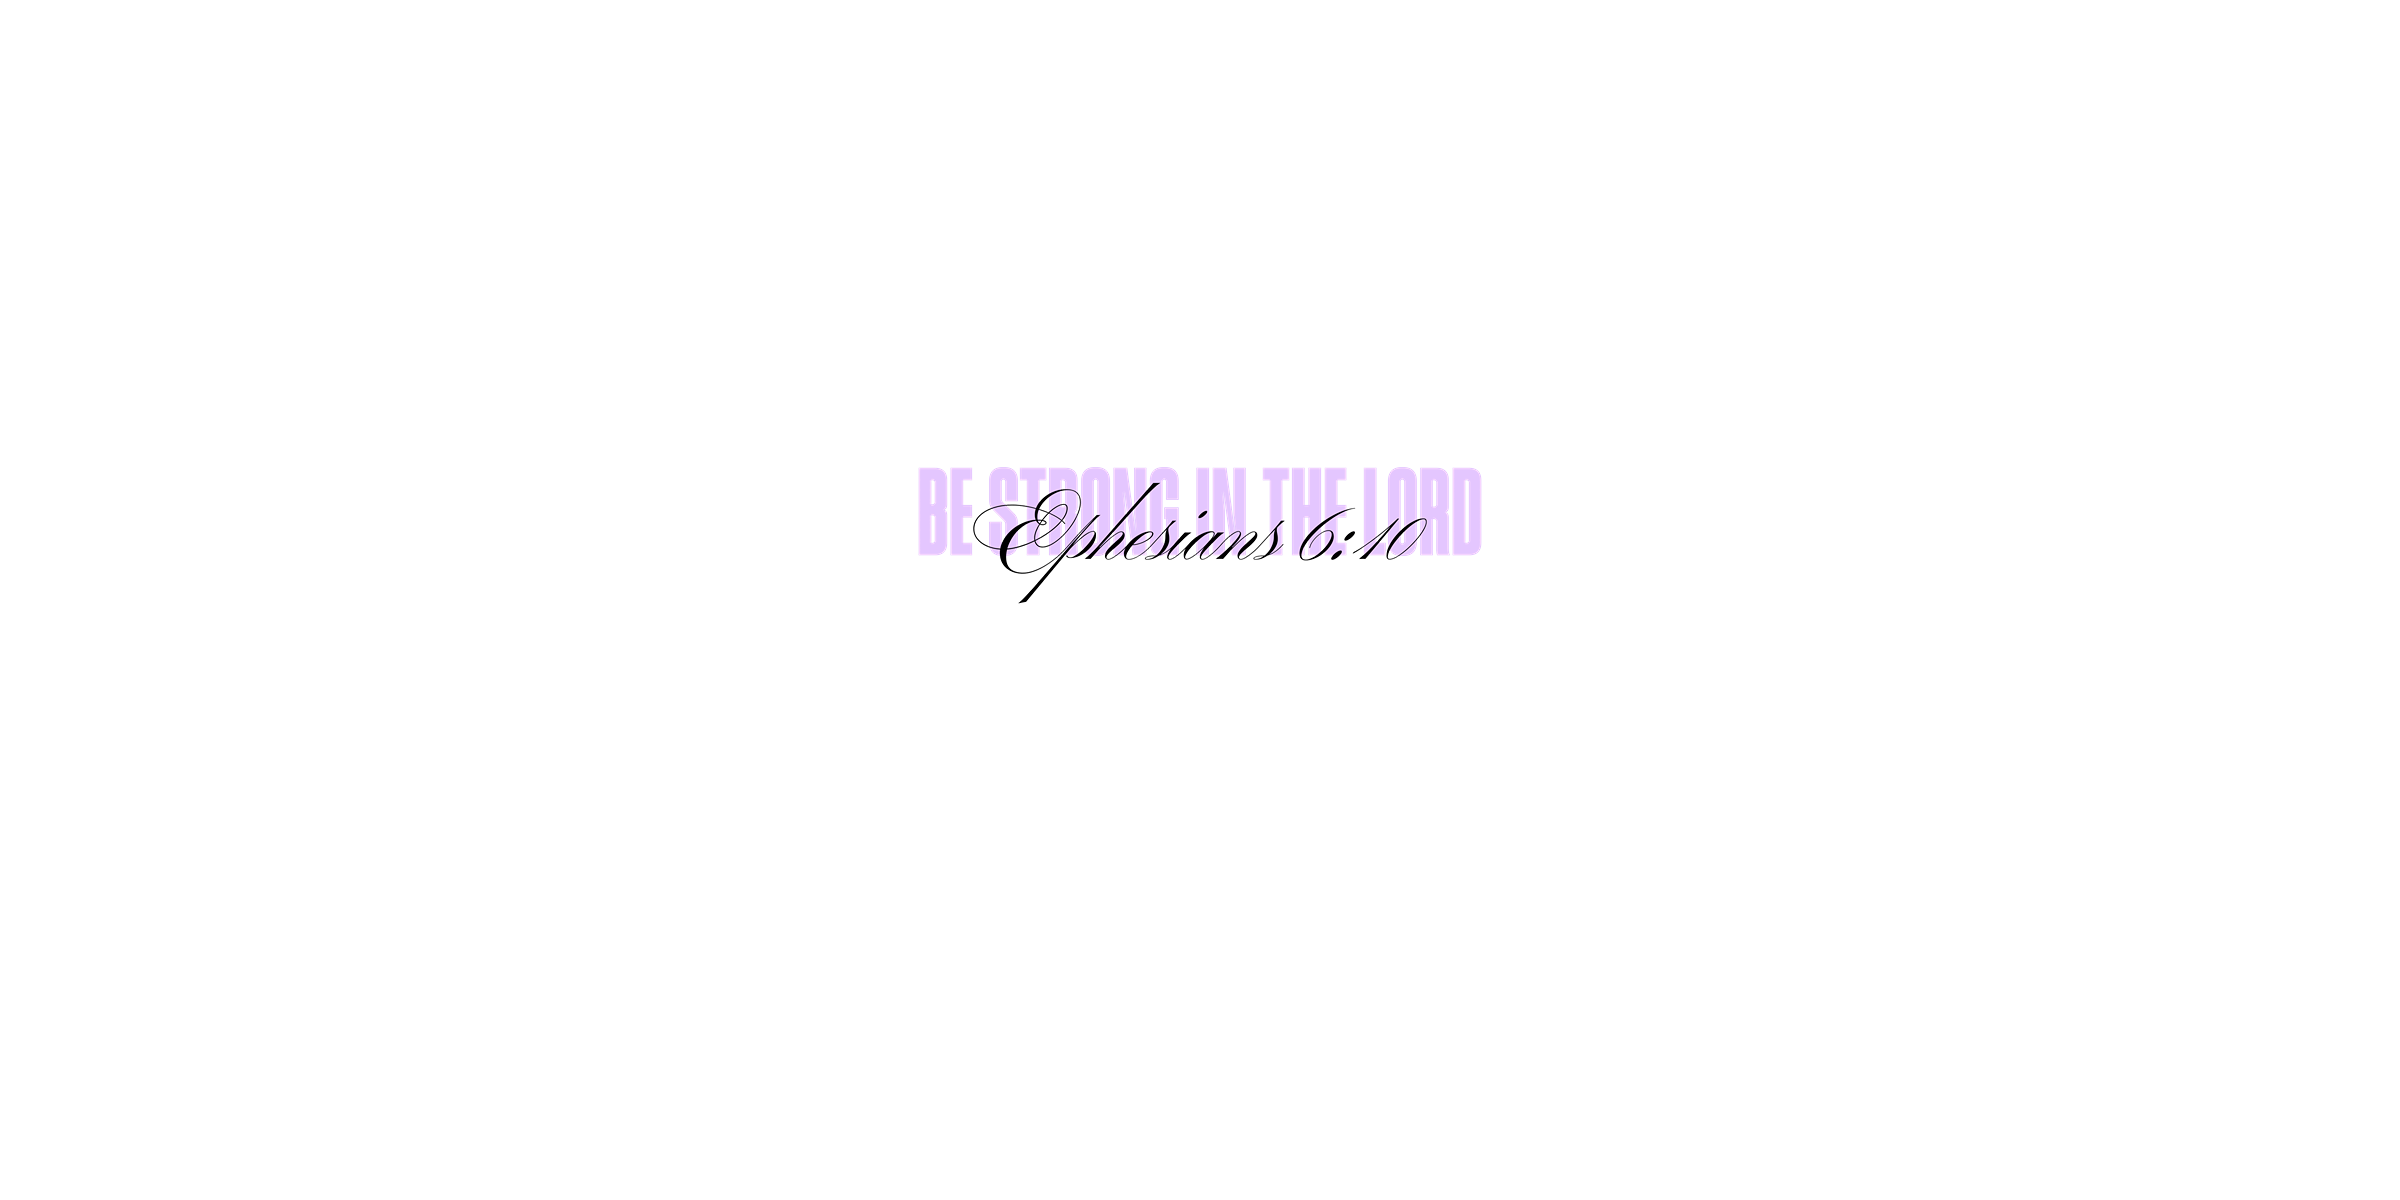 Ephesians 6:10 - be strong in the Lord